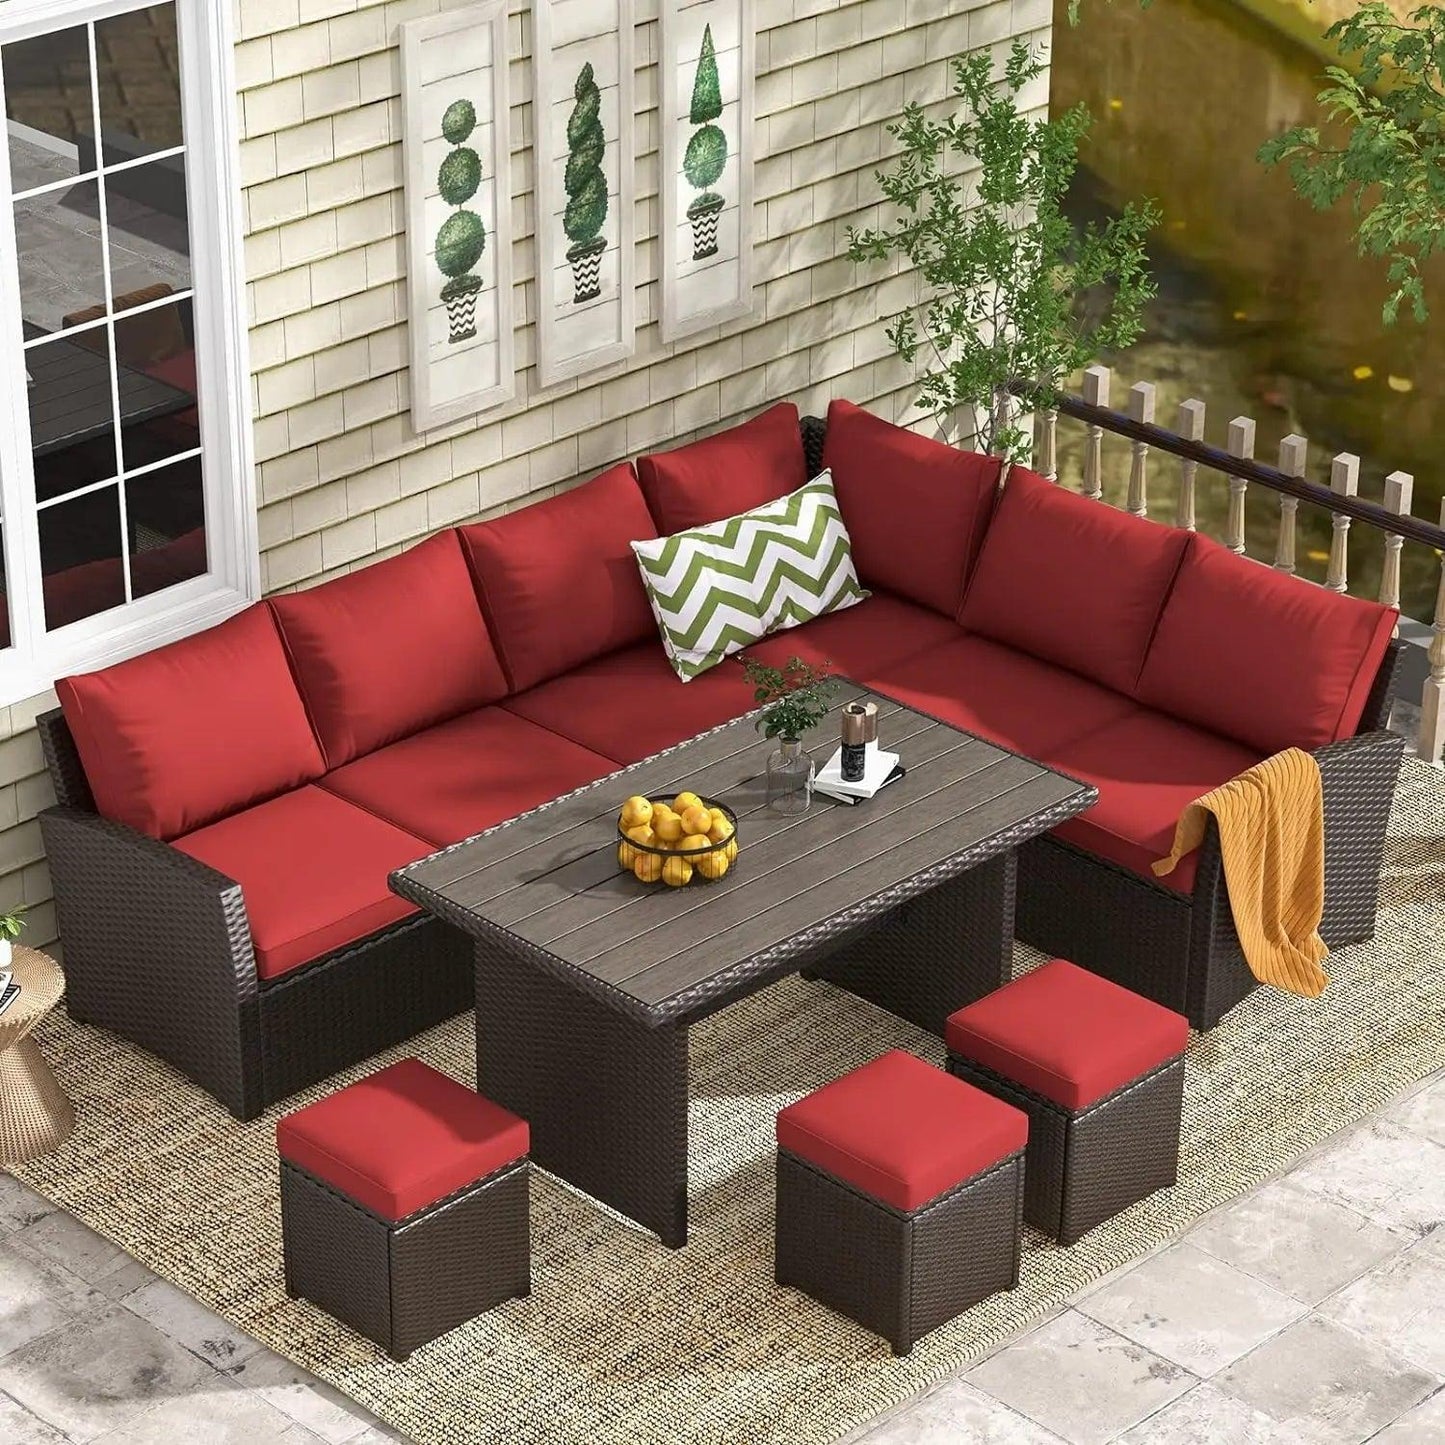 7 Piece All Weather Wicker Conversation Set w/ Dining Table & 3 Ottoman - Whole Home Warehouse 